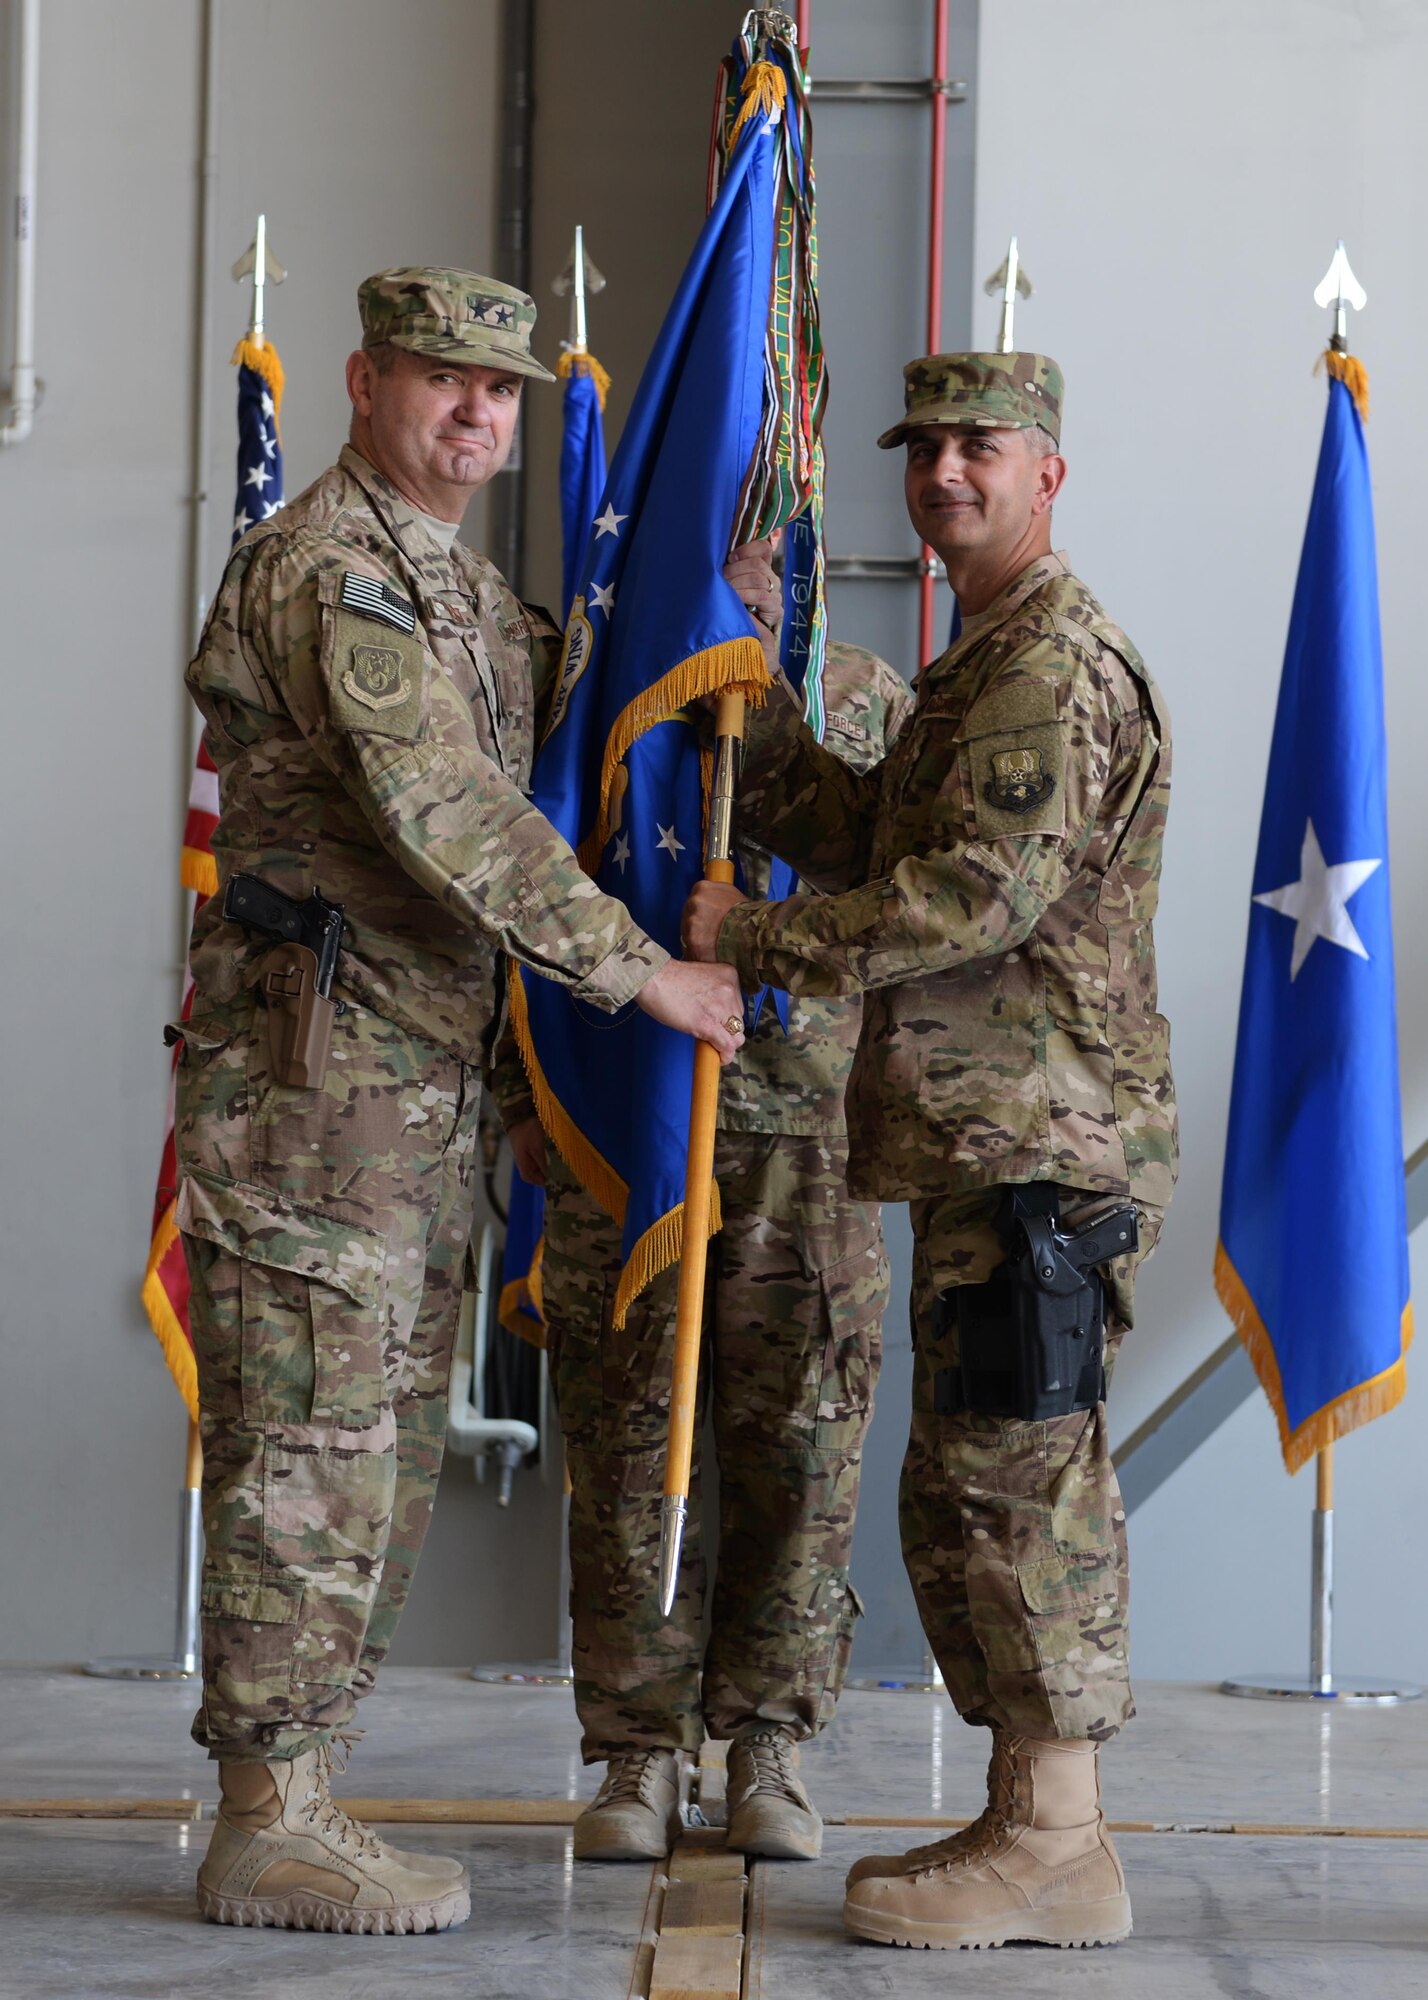 U.S. Air Force Maj. Gen. Scott West, 9th Air and Space Expeditionary Task Force-Afghanistan commander, hands the guidon to the new commander of the 455th Air Expeditionary Wing, Brig. Gen. Dave Julazadeh July 1, 2015, at Bagram Airfield, Afghanistan. (U.S. Air Force photo by Senior Airman Cierra Presentado/Released)  